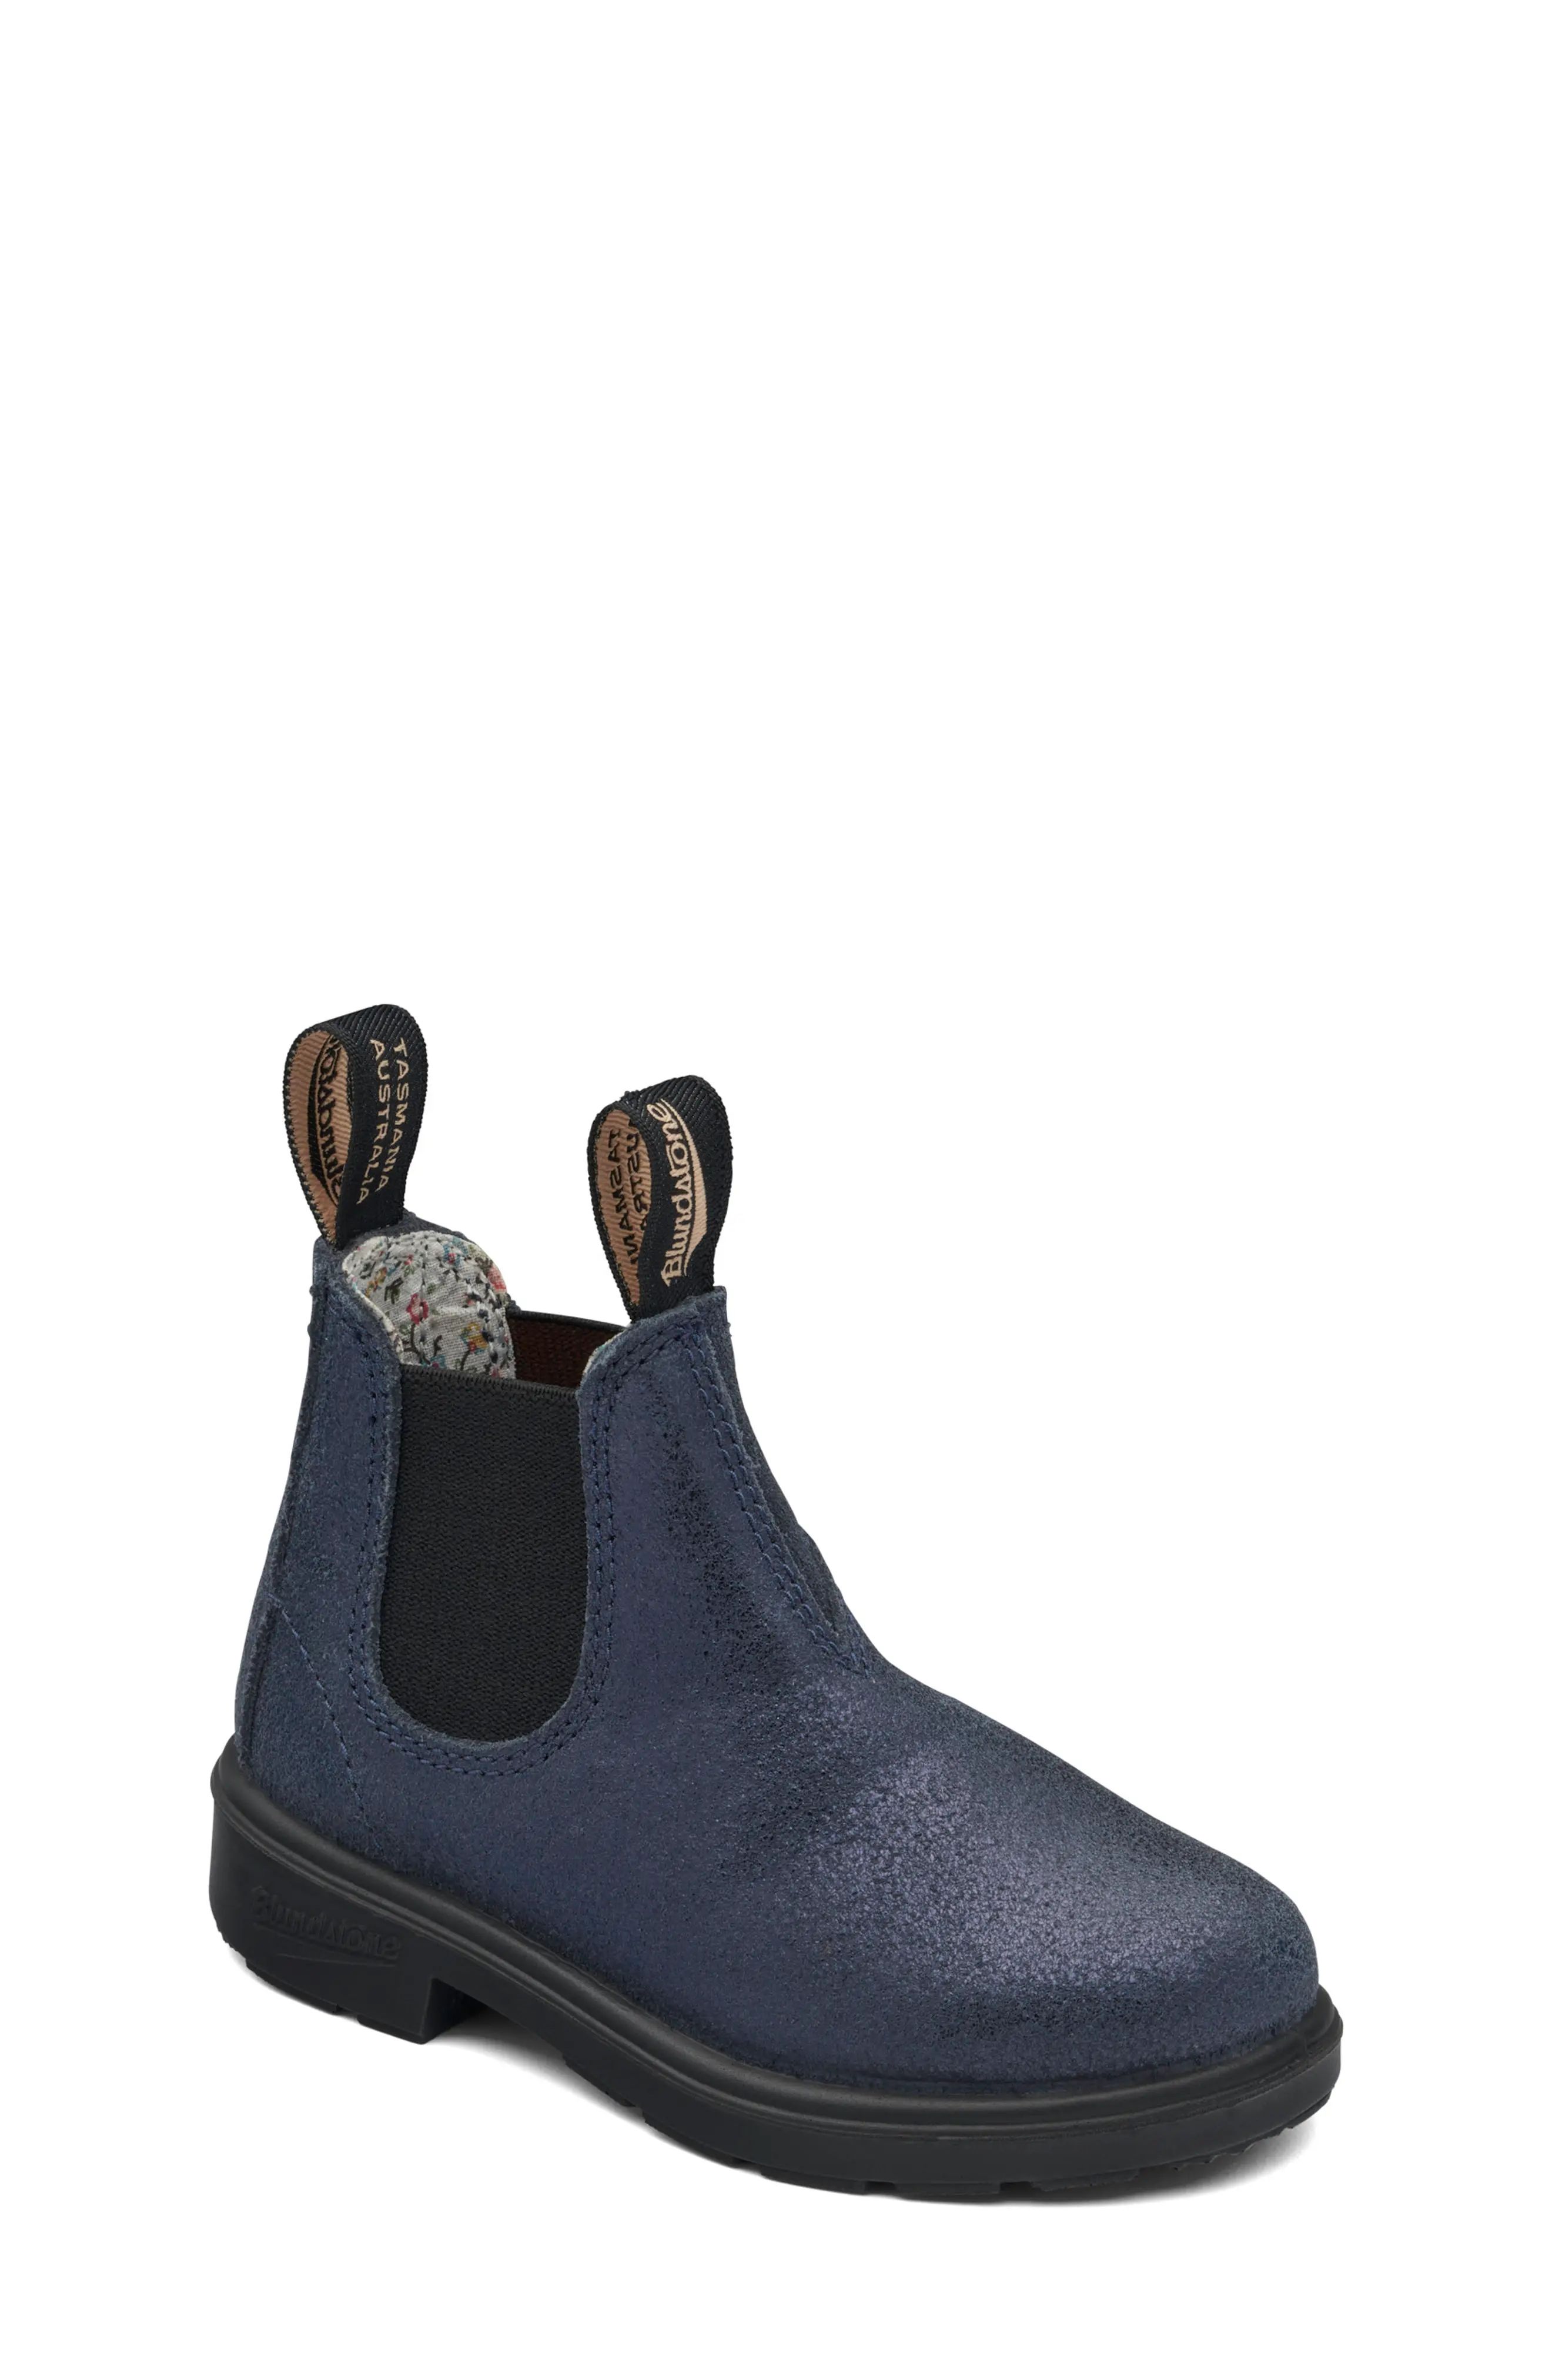 Toddler Boy's Blundstone Blunnies Chelsea Boot, Size 11US - Blue | Nordstrom